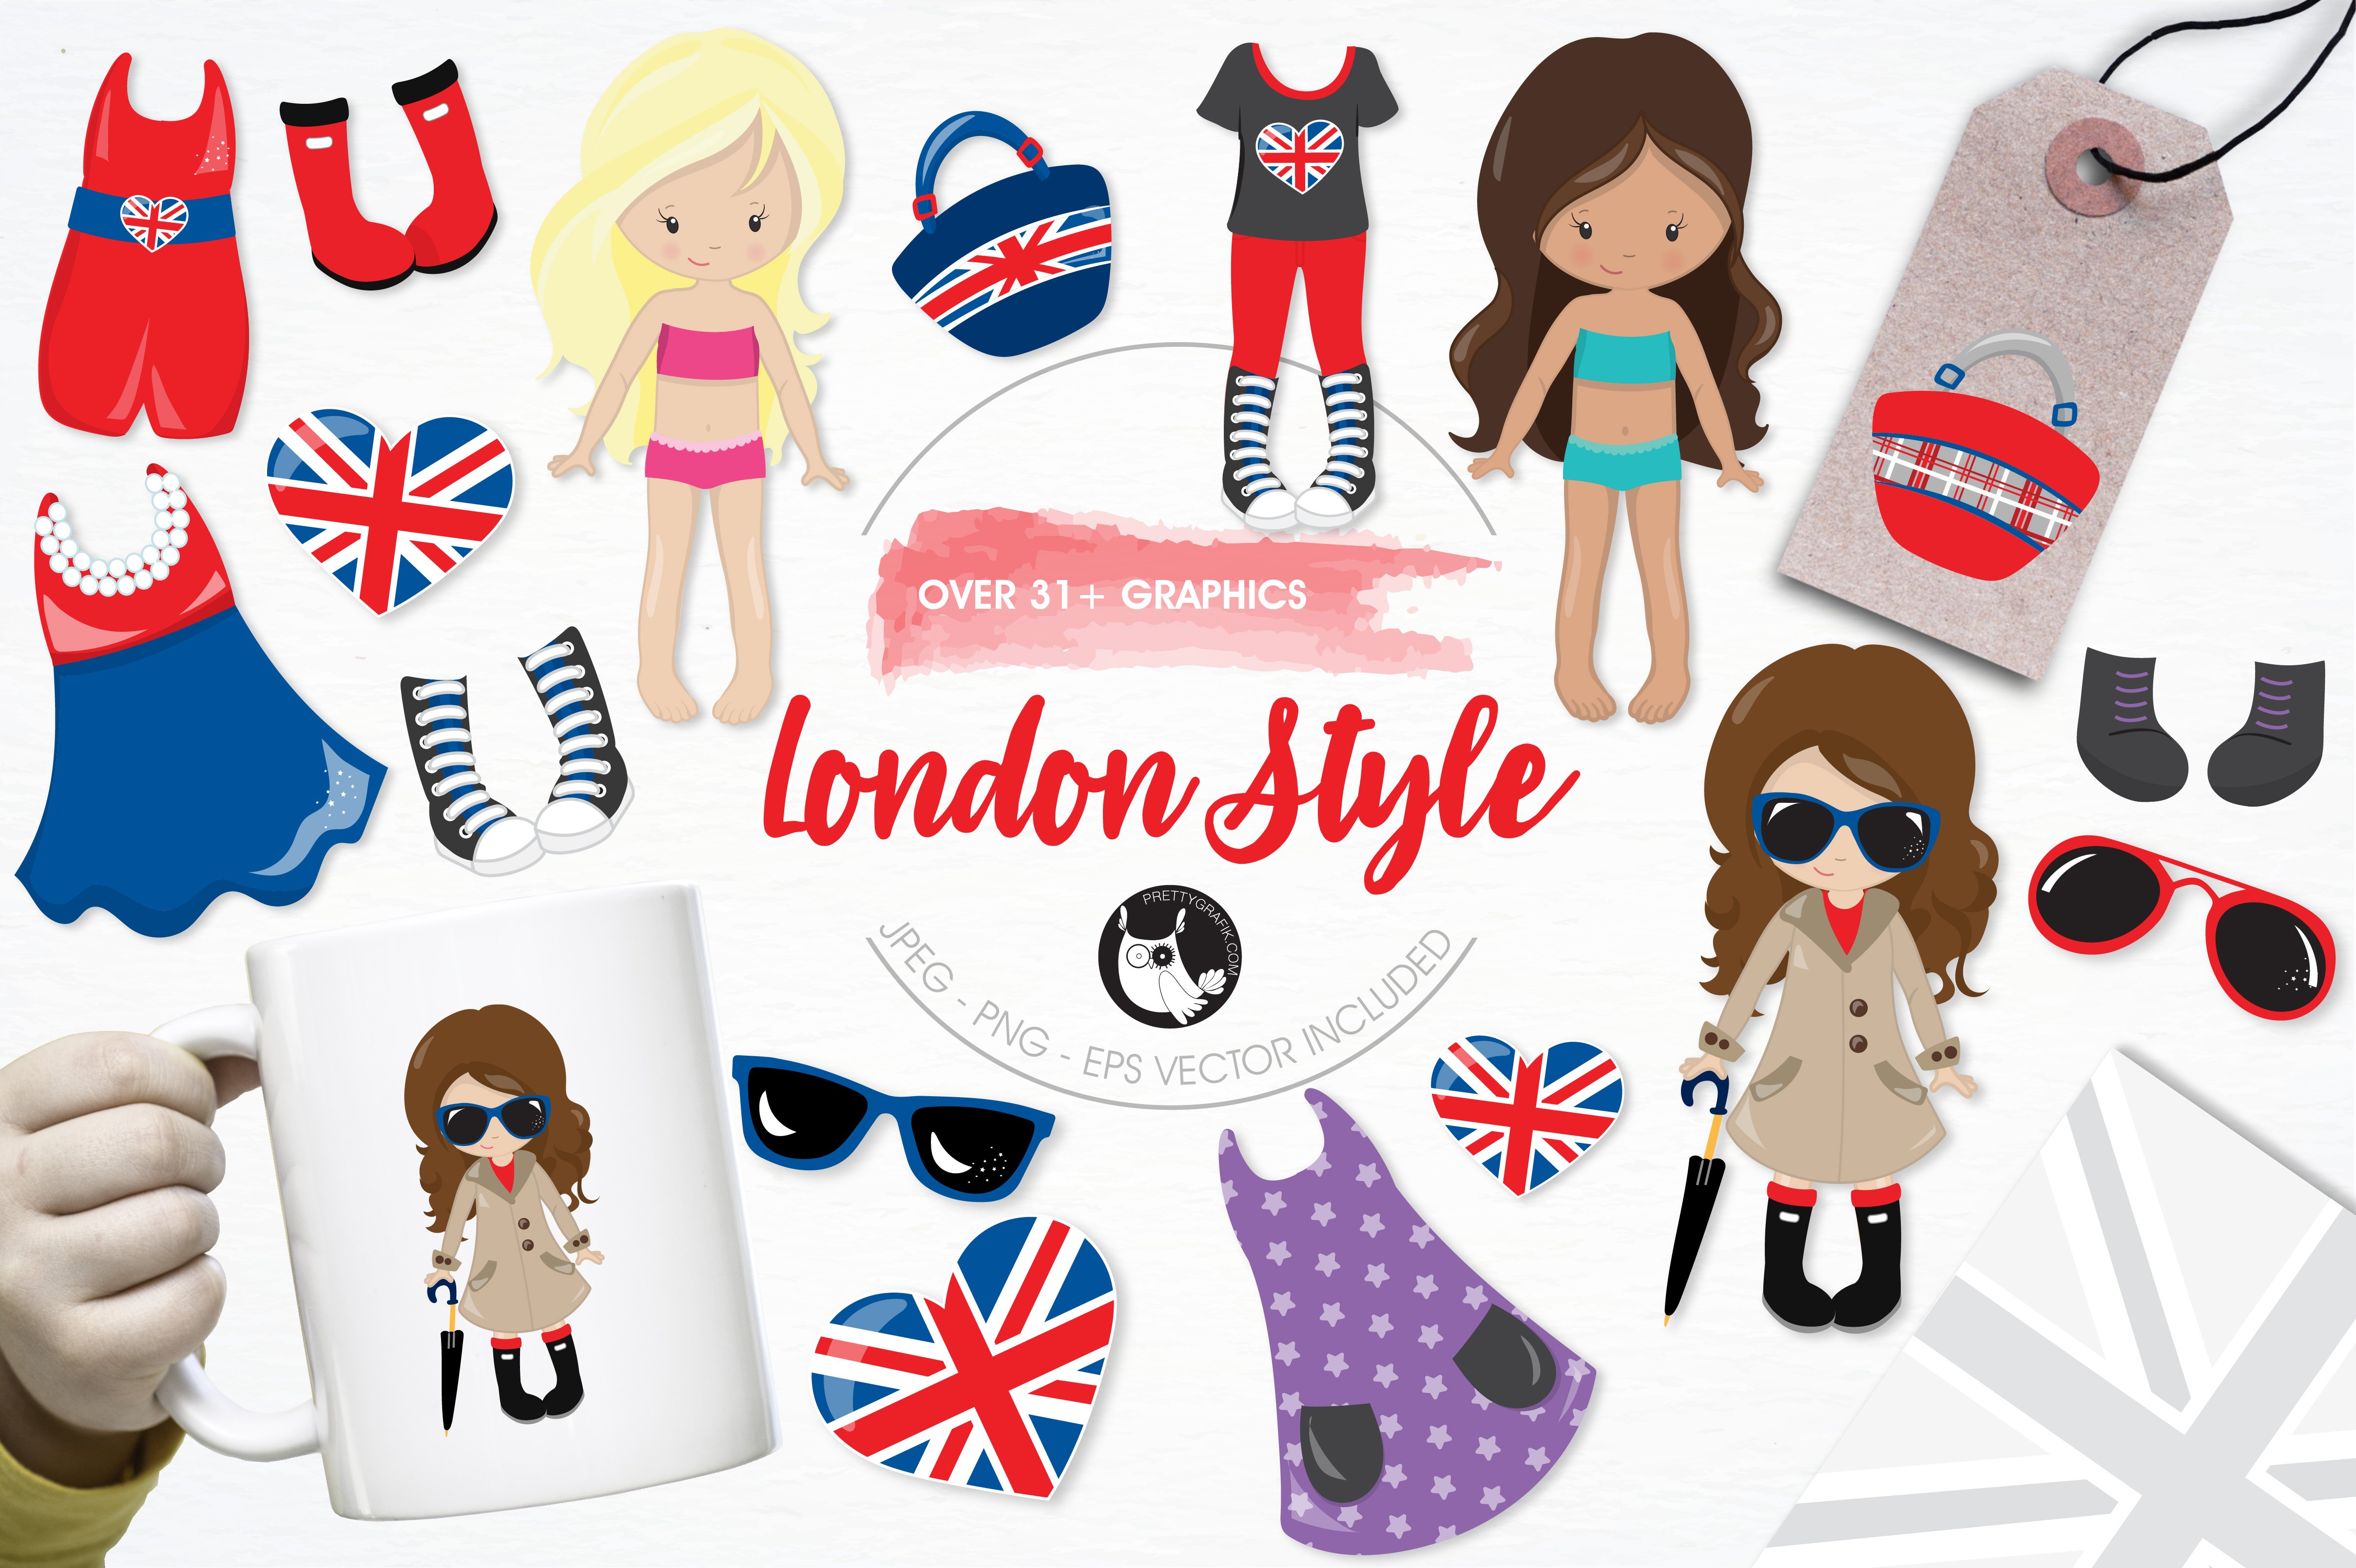 London style illustration pack - Vector Image